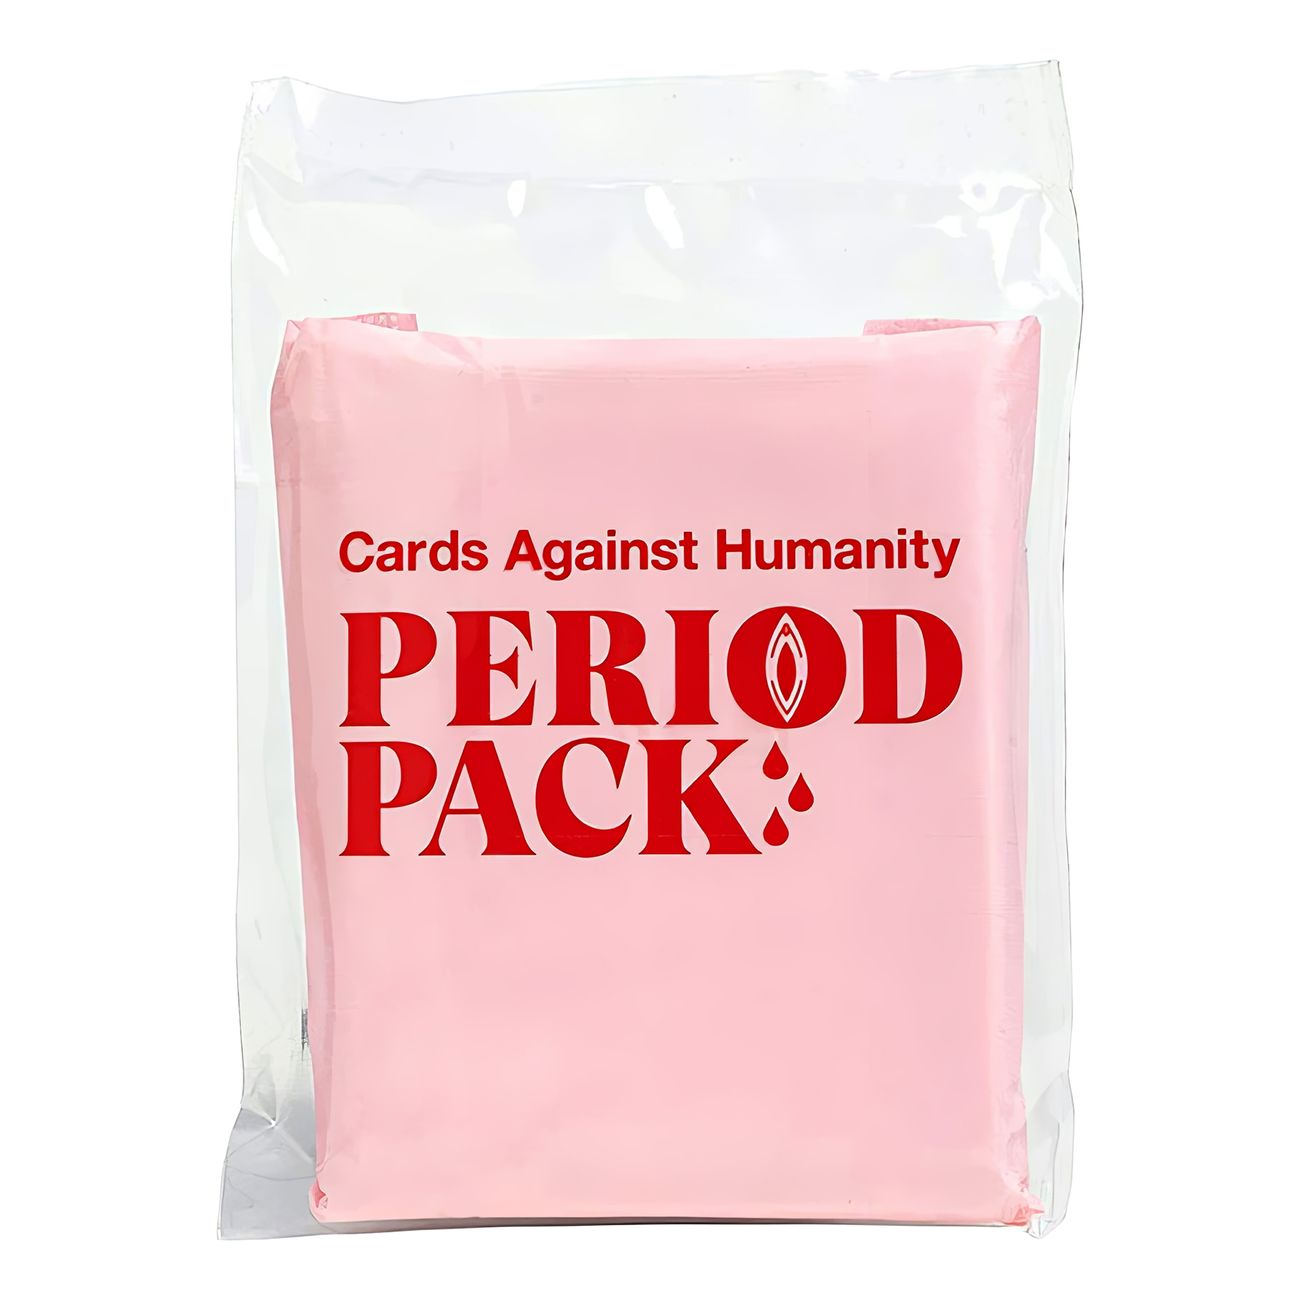 cards-against-humanity-25019-35